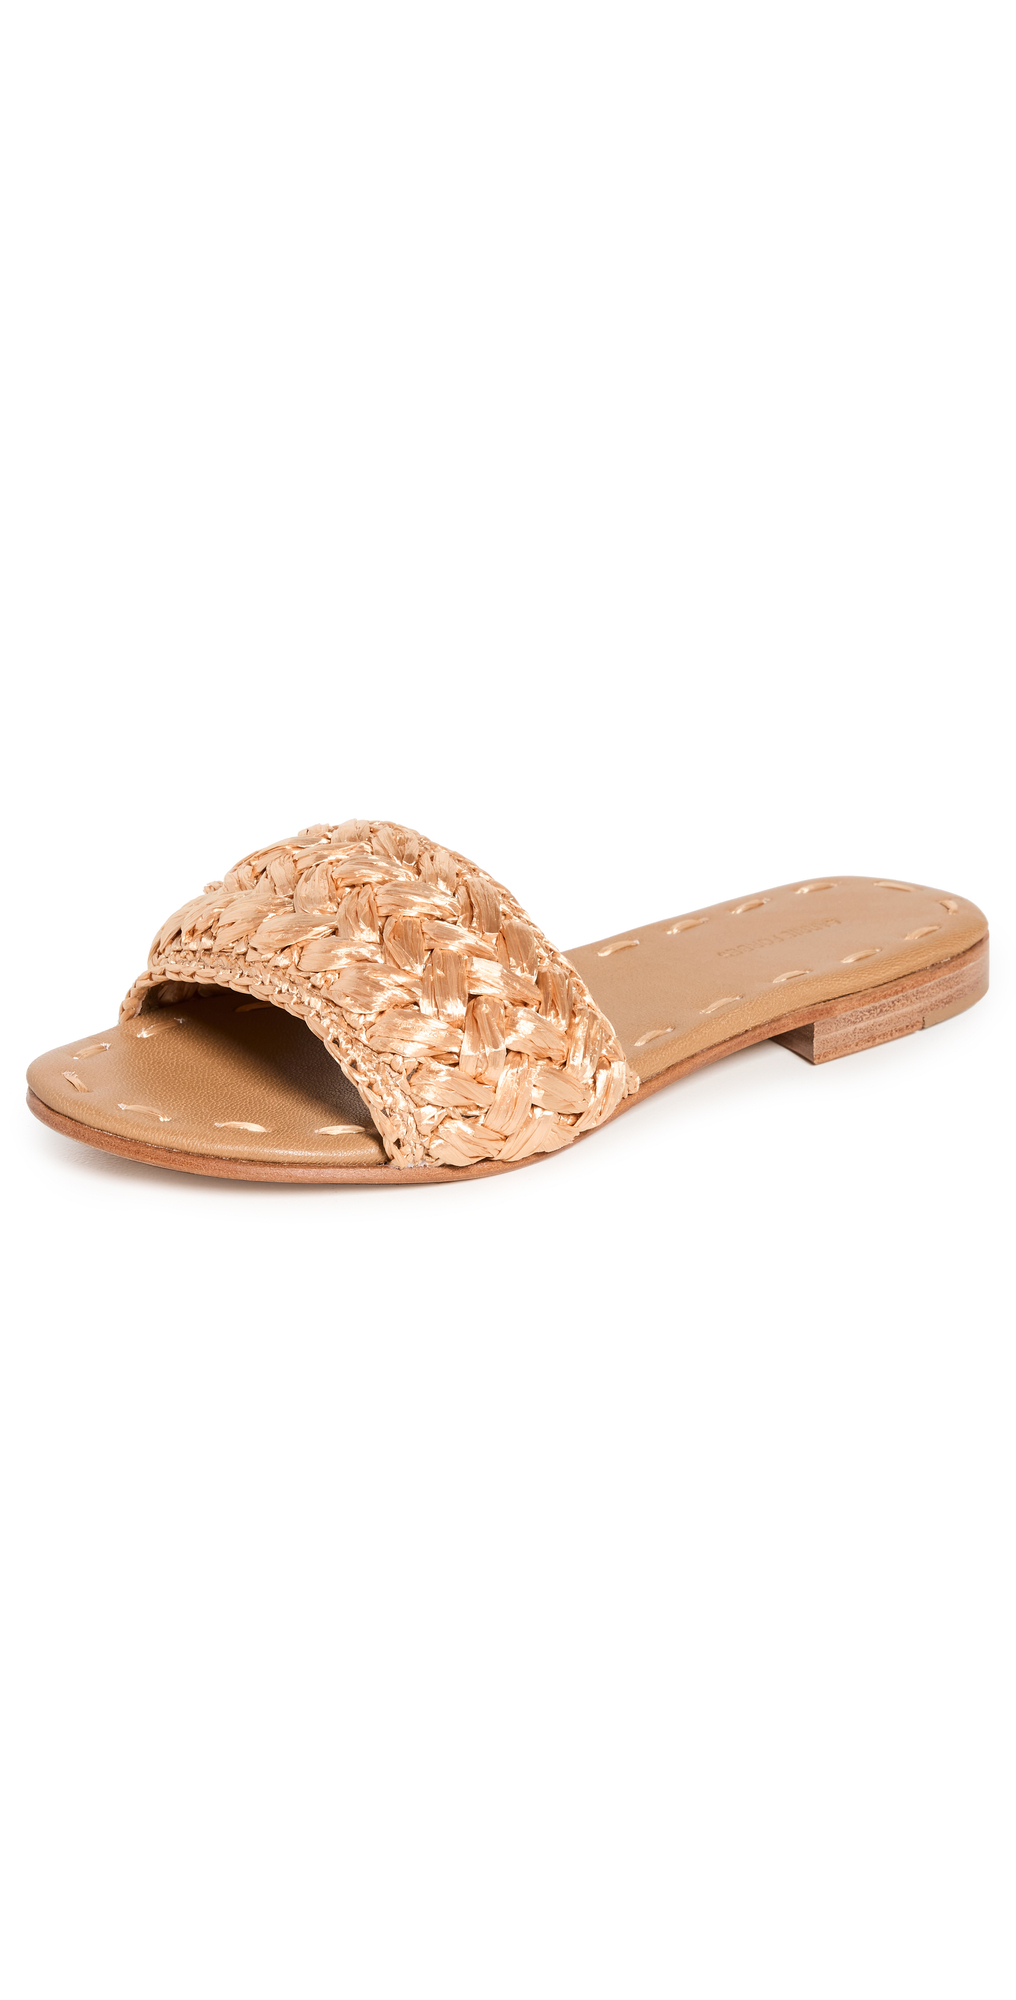 Carrie Forbes Trensa Slides in gold